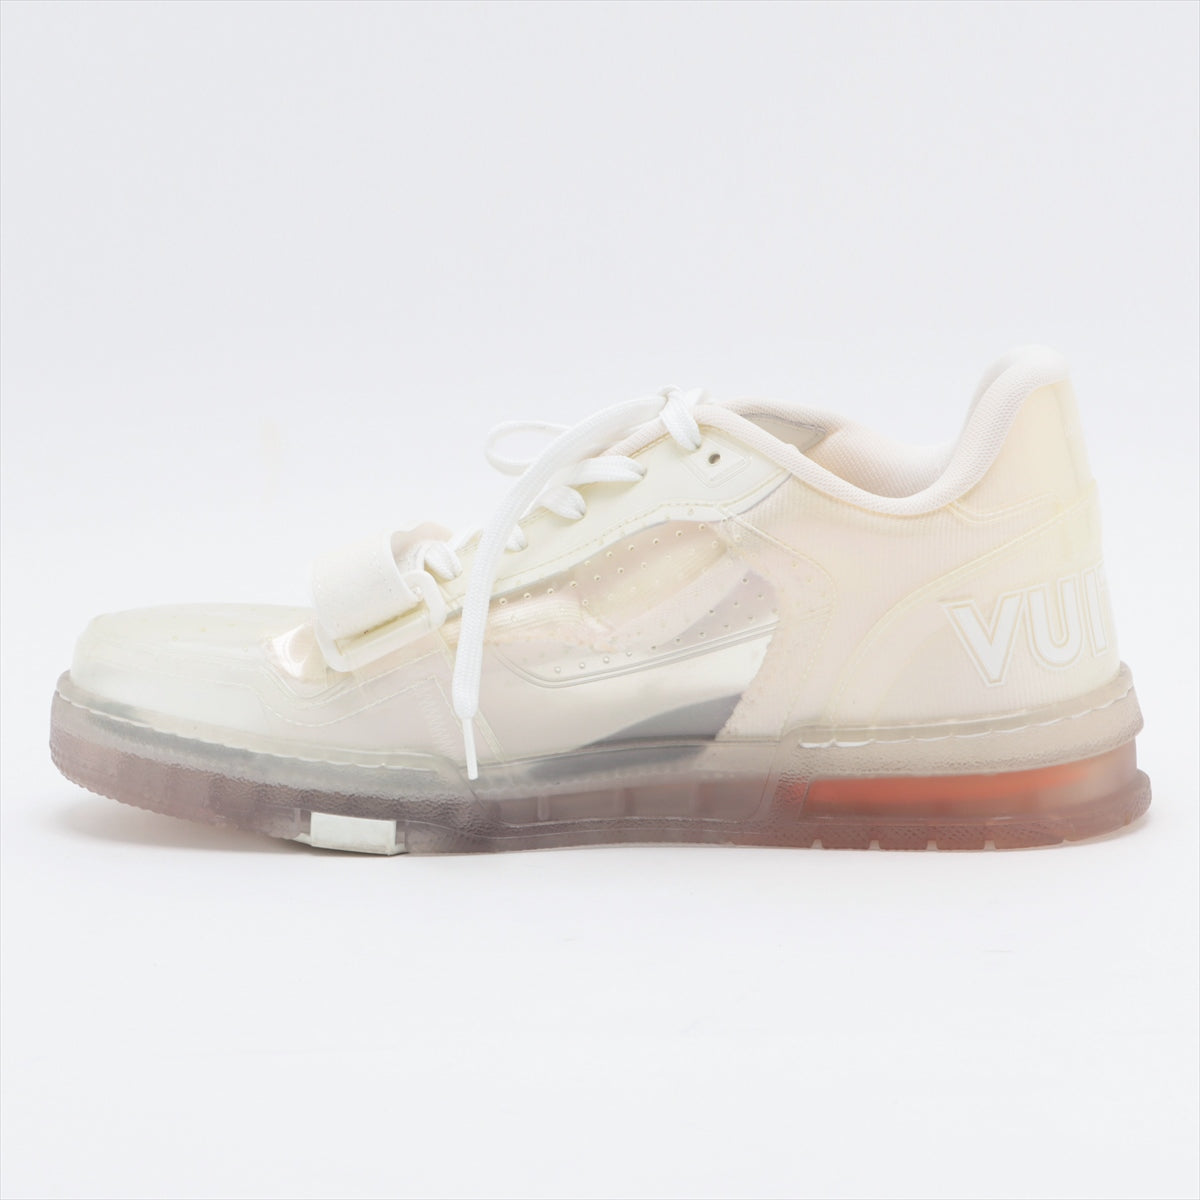 Louis Vuitton LV Trainer Line 21 years PVC Sneakers 7 Men's Ivory GO0251 Monogram Skeleton There is a bag